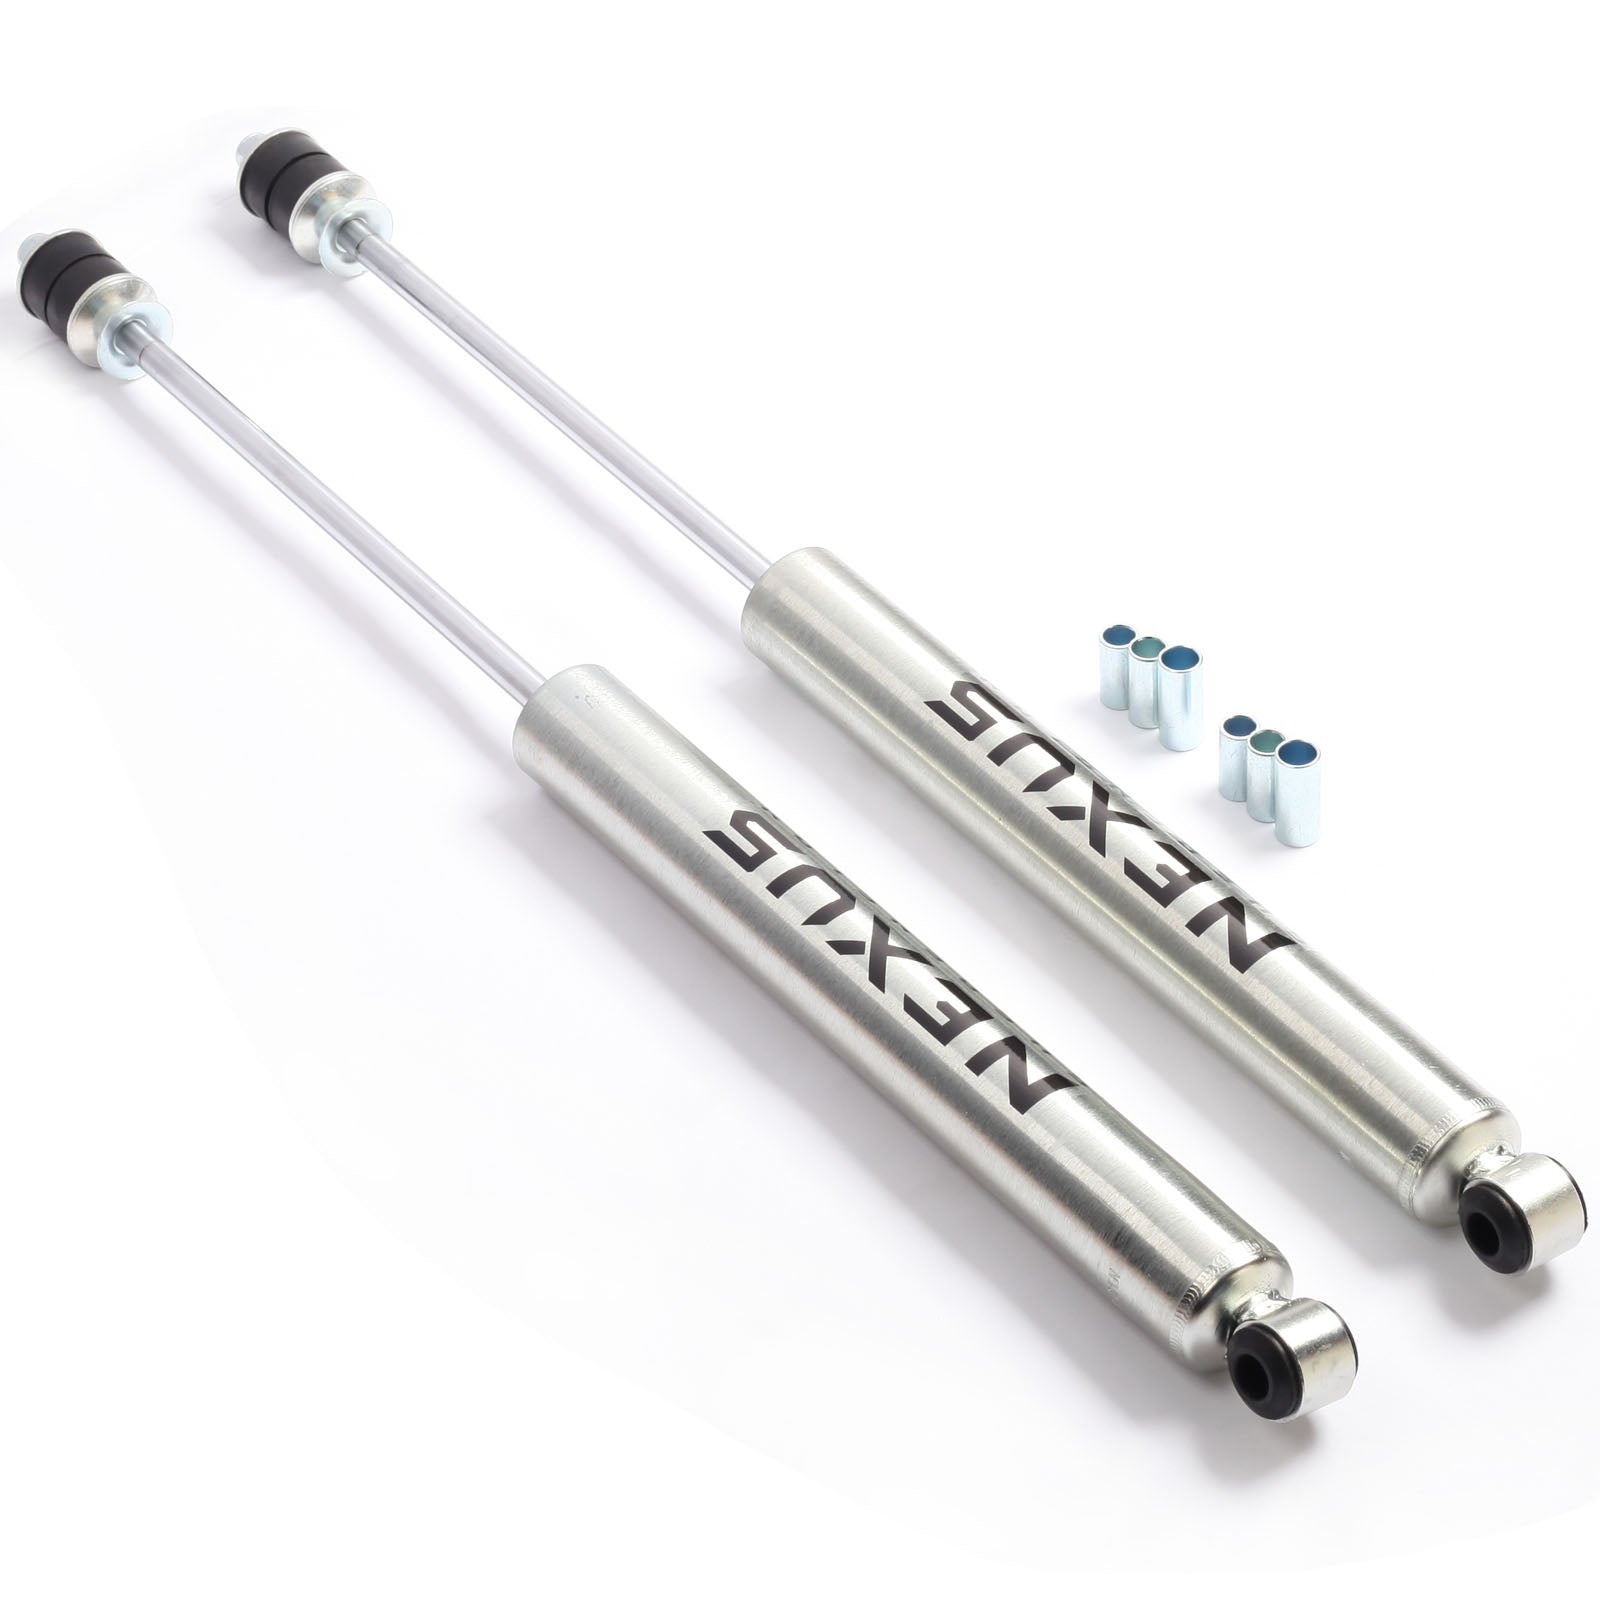 NEXUS SUSPENSION 2-5 Inch Lift Rear Shock Absorber for Toyota Tundra 2007-2020,Zinc Plated Coating,Pair Pack